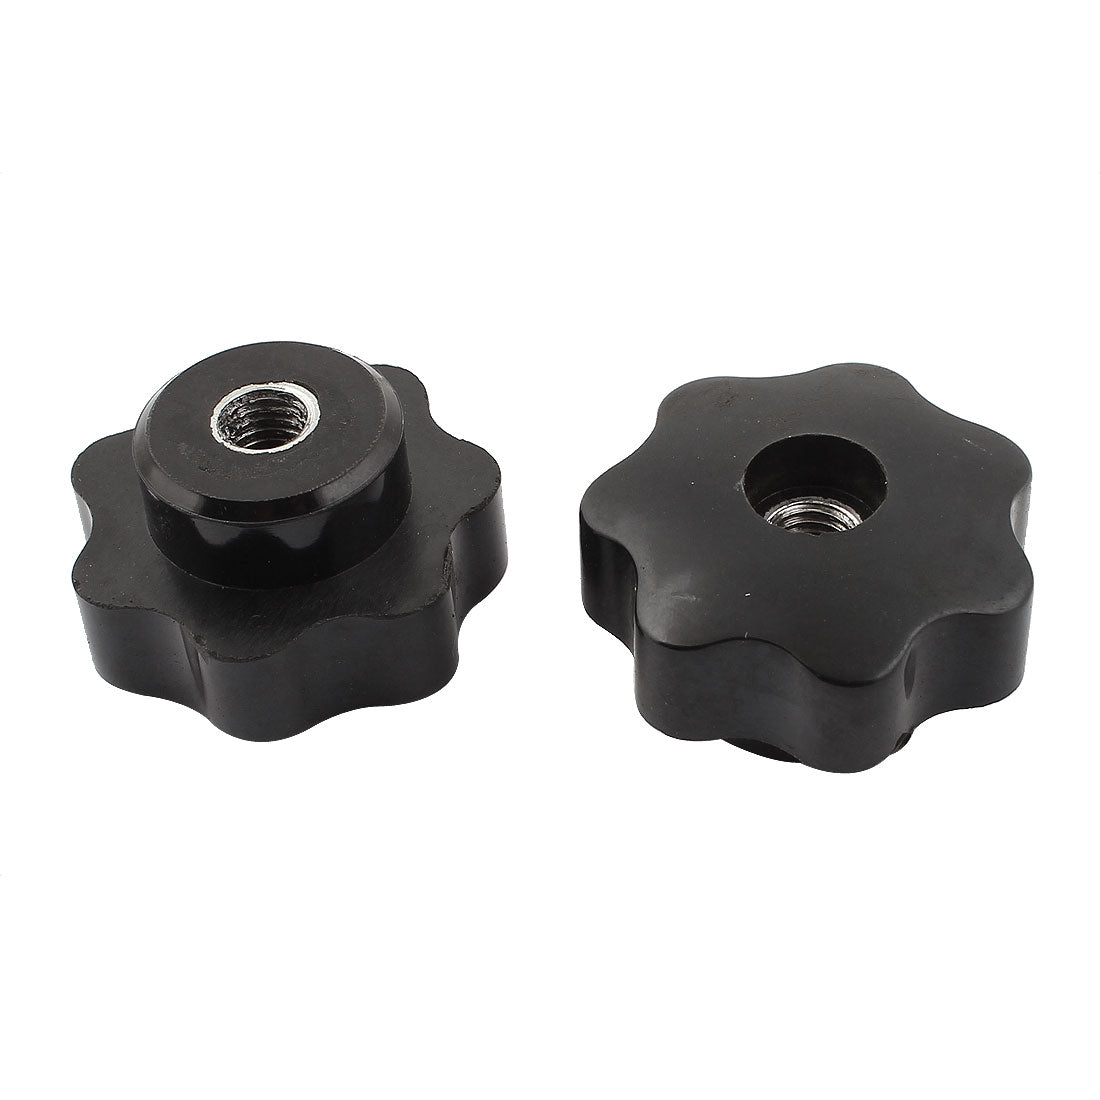 uxcell Uxcell M8 1.25mm Pitch Female Thread Through Hole Star Screw Clamping Knob Black 2pcs